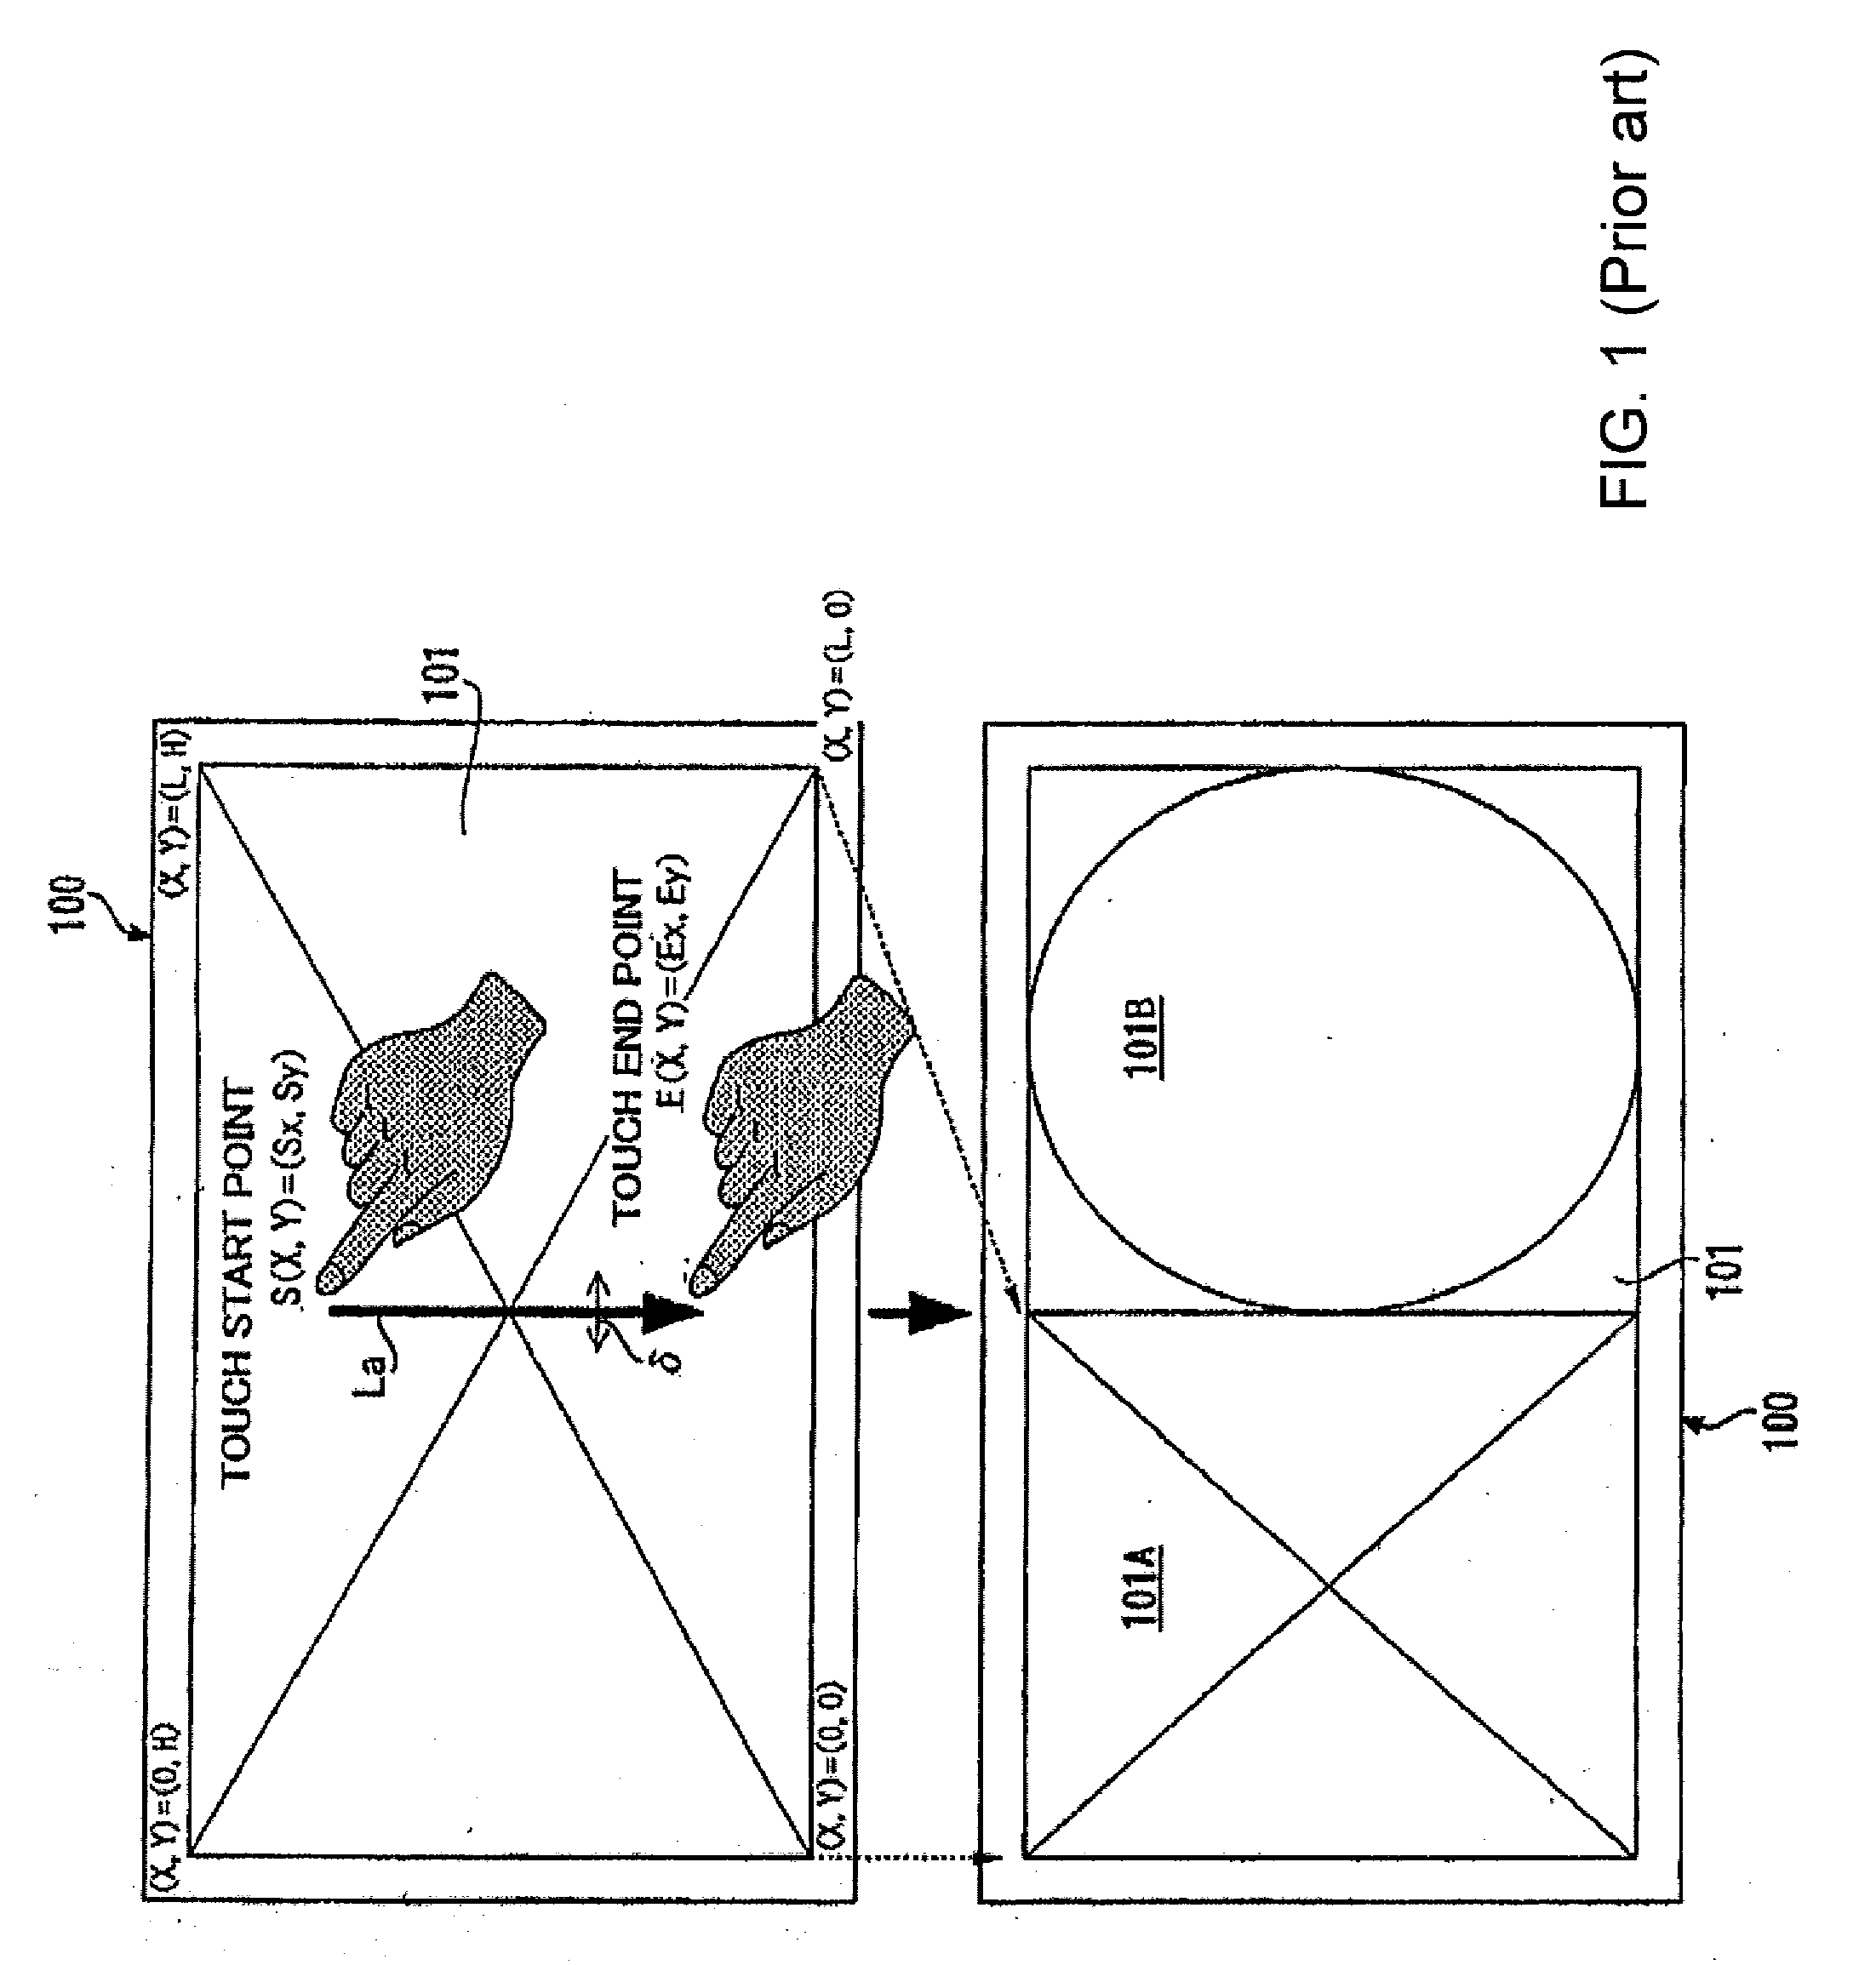 Method and apparatus for controlling and displaying contents in a user interface